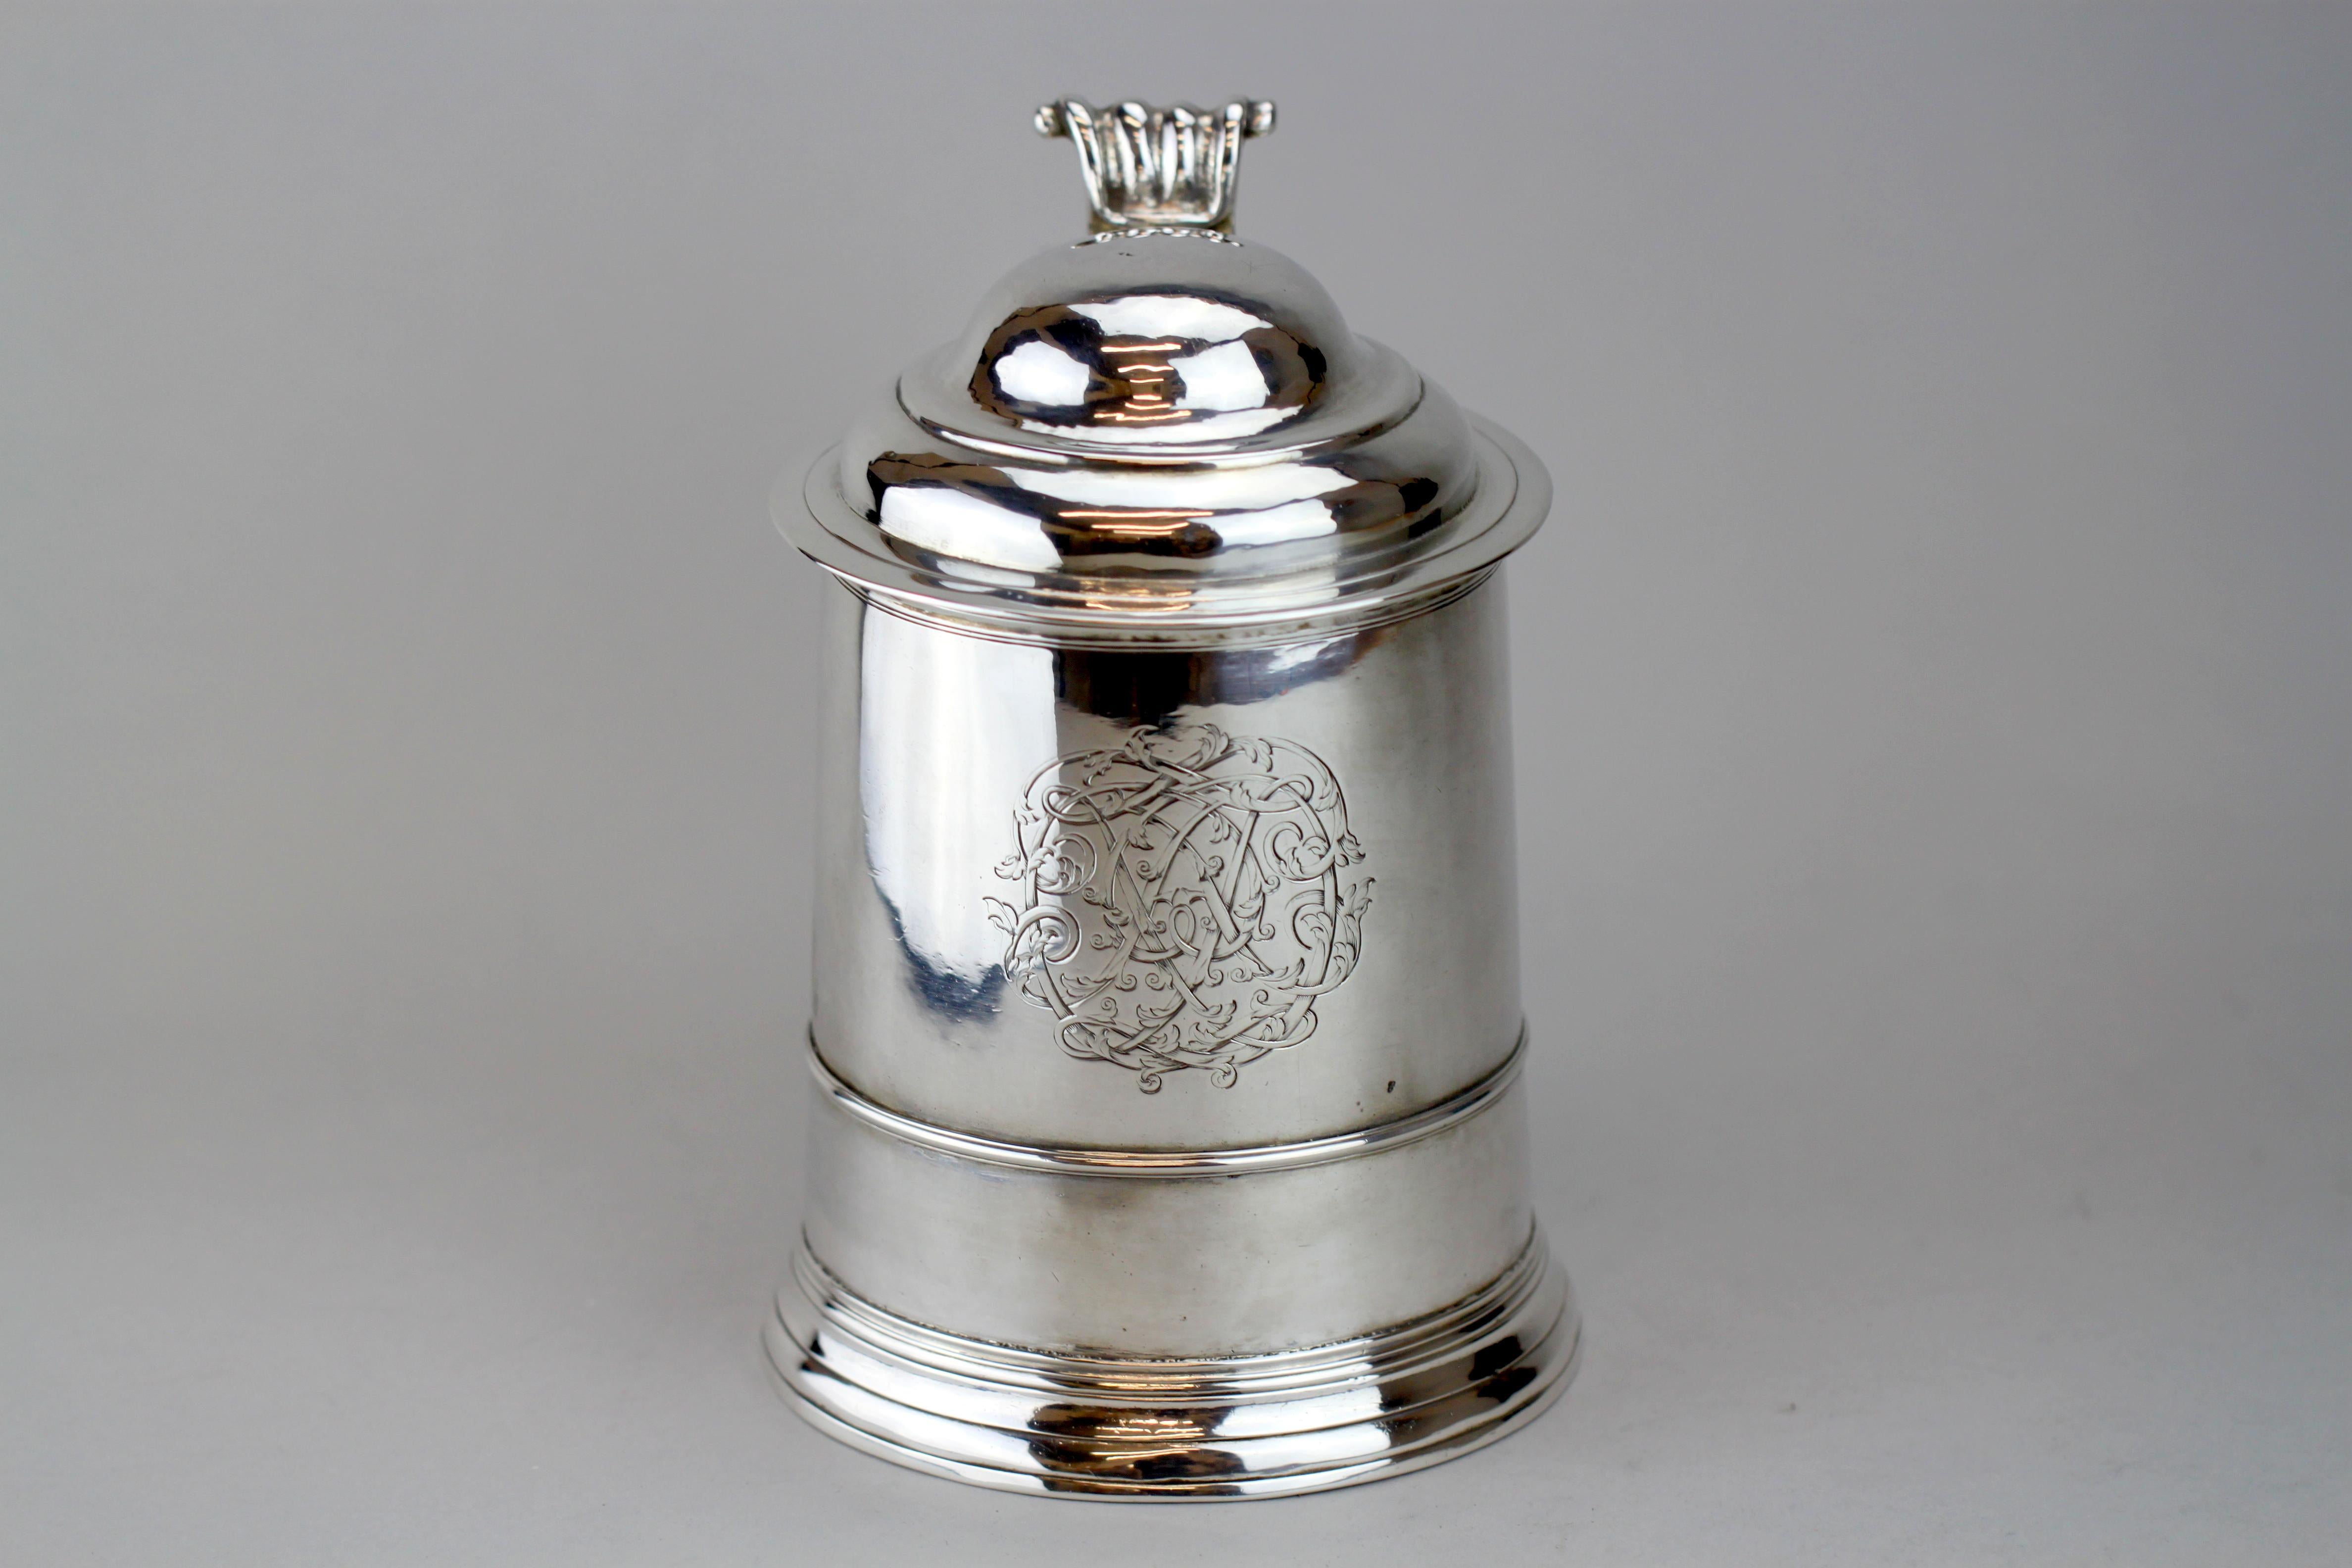 Antique silver Georgian tankard
Has engravings F.D on a handle and bottom.
Made in England, London, 1808
Fully hallmarked.

Maker: M Unidentified

Dimensions:
Diameter/height 12.6 x 18.5 cm

Weight: 796 grams

Condition: Tankard is in